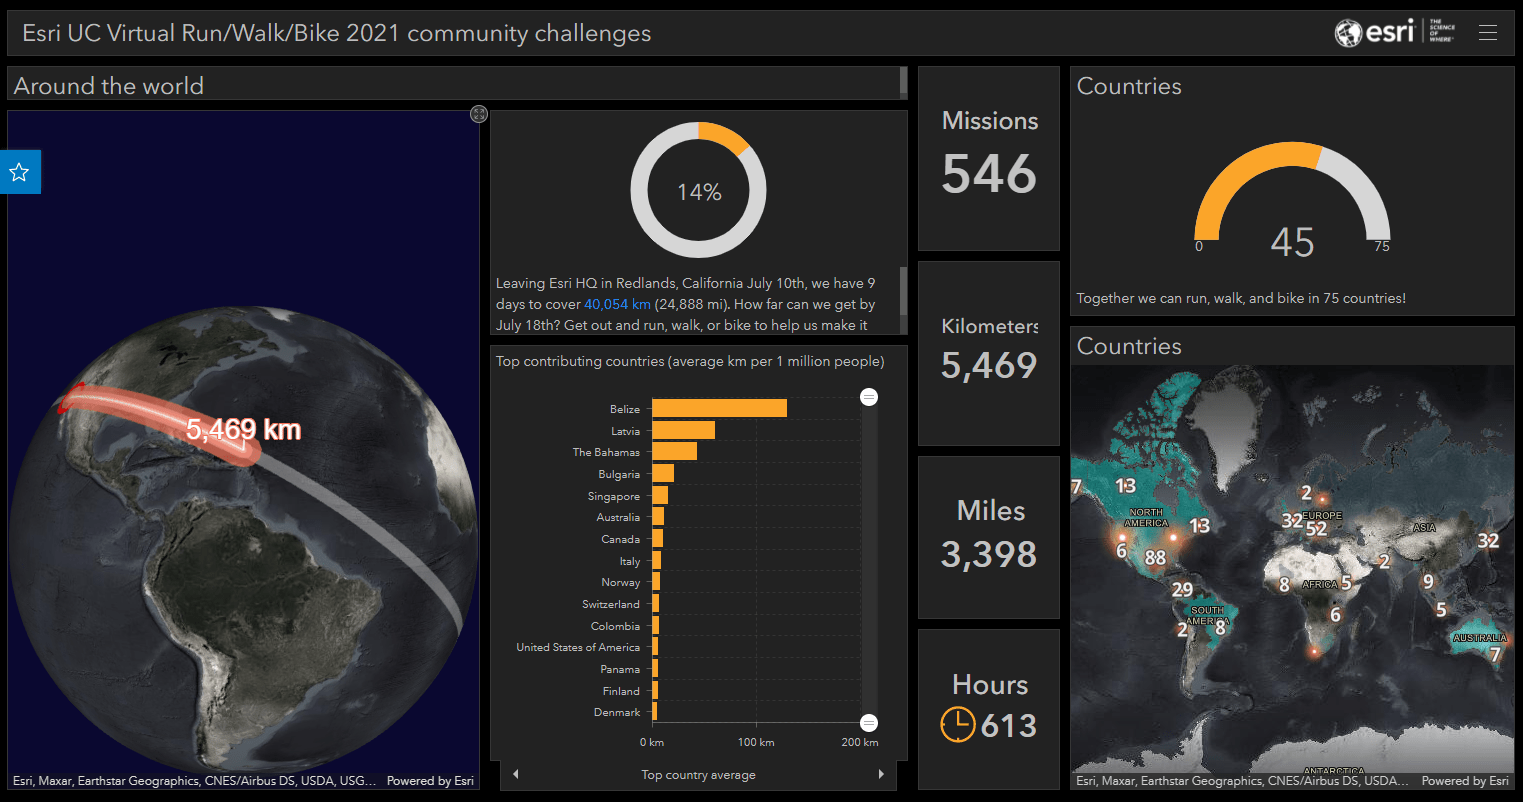 Esri UC Virtual Run/Walk/Bike 2021 community challenges leaderboard displaying number of kilometers, number of countries, and top contributing countries